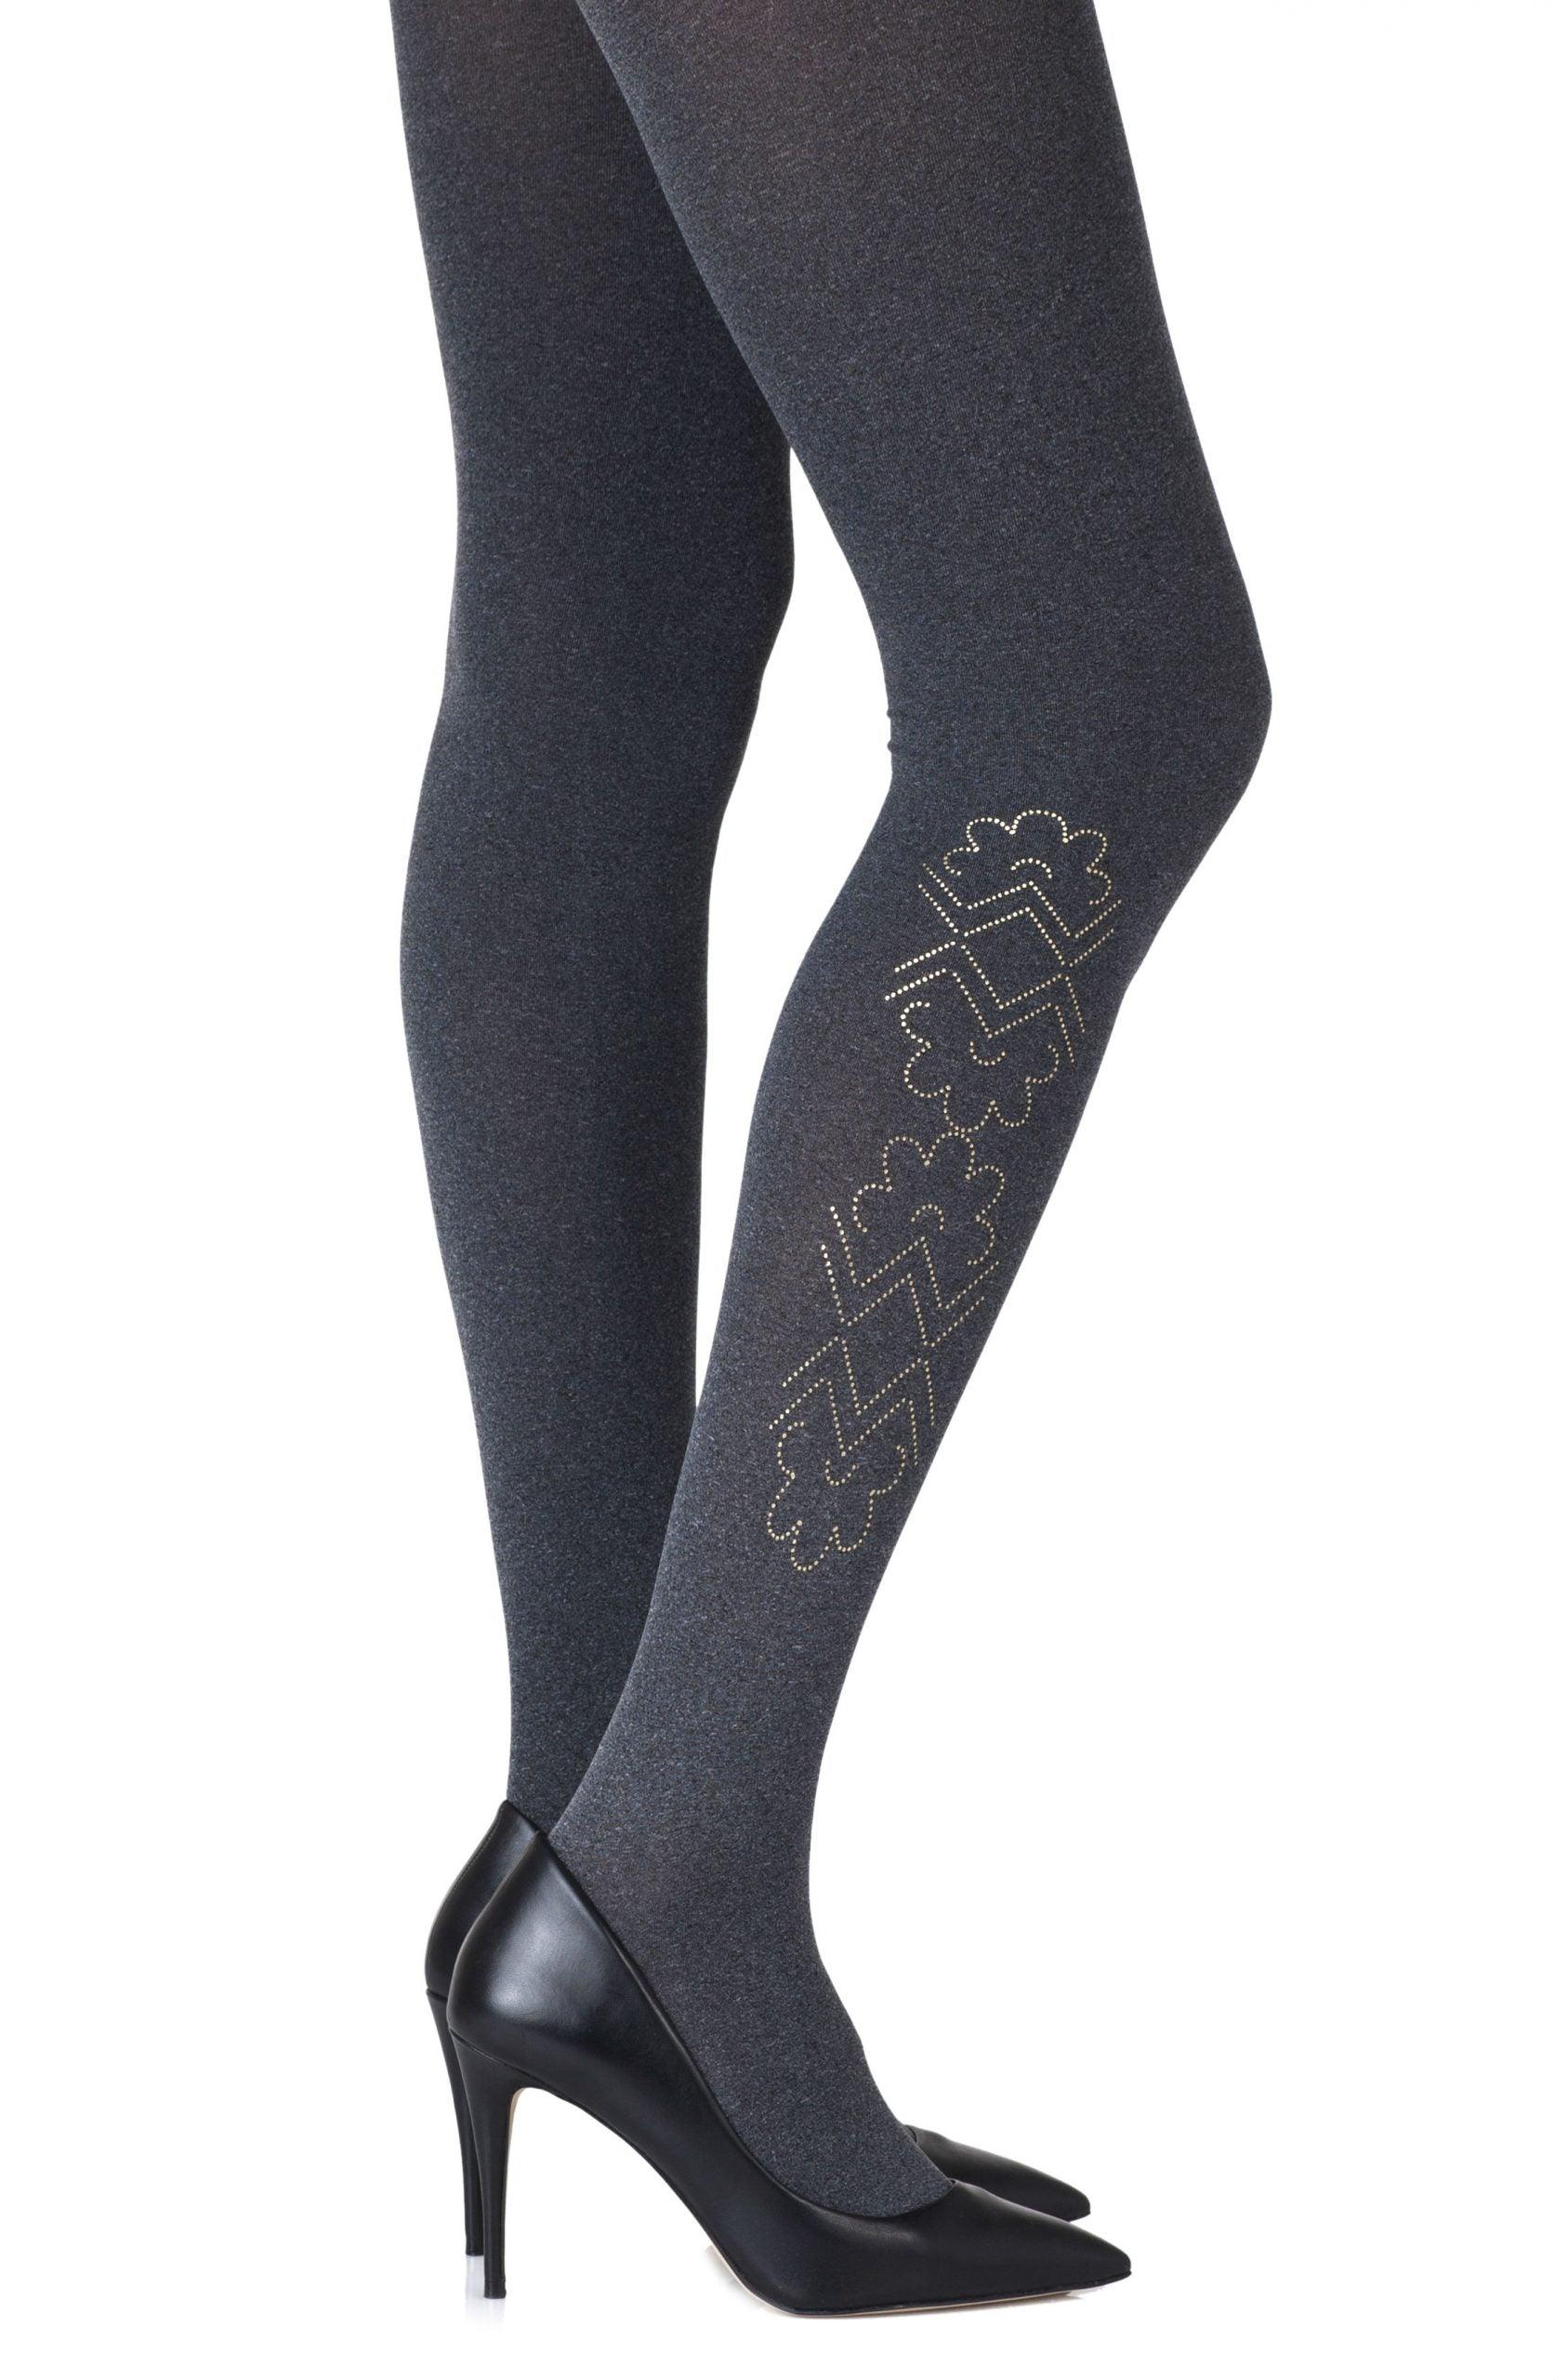 Zohara "Caught In The Metal" Heather Grey Print Tights - Sydney Rose Lingerie 